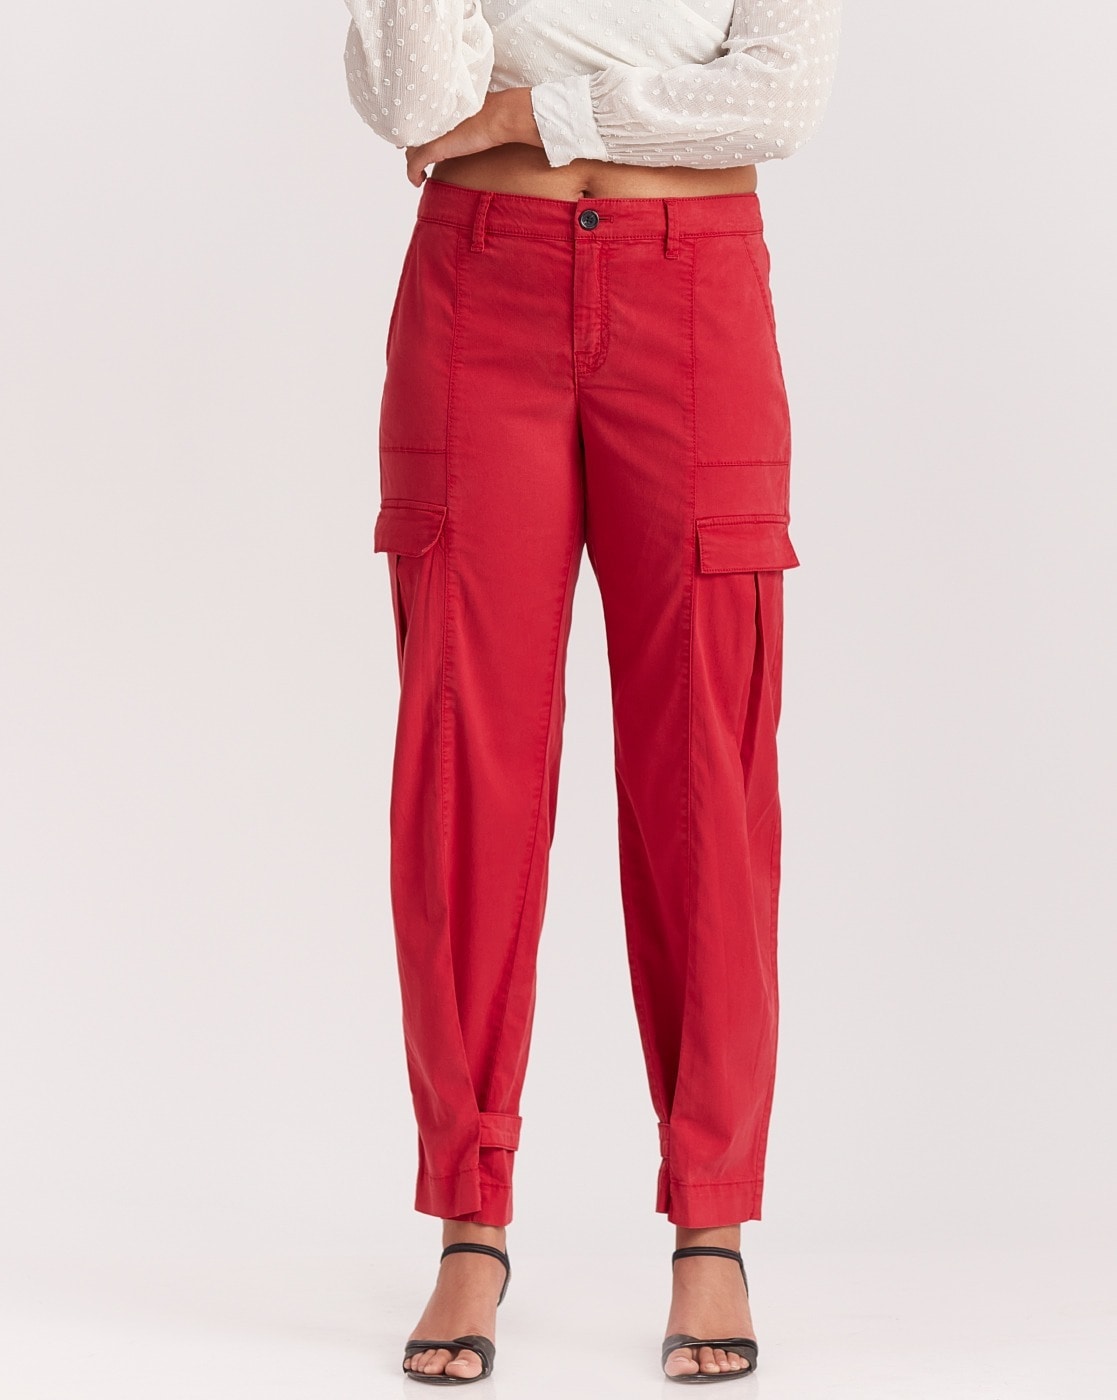 Buy Ishin Women Red Regular fit Cigarette pants Online at Low Prices in  India  Paytmmallcom